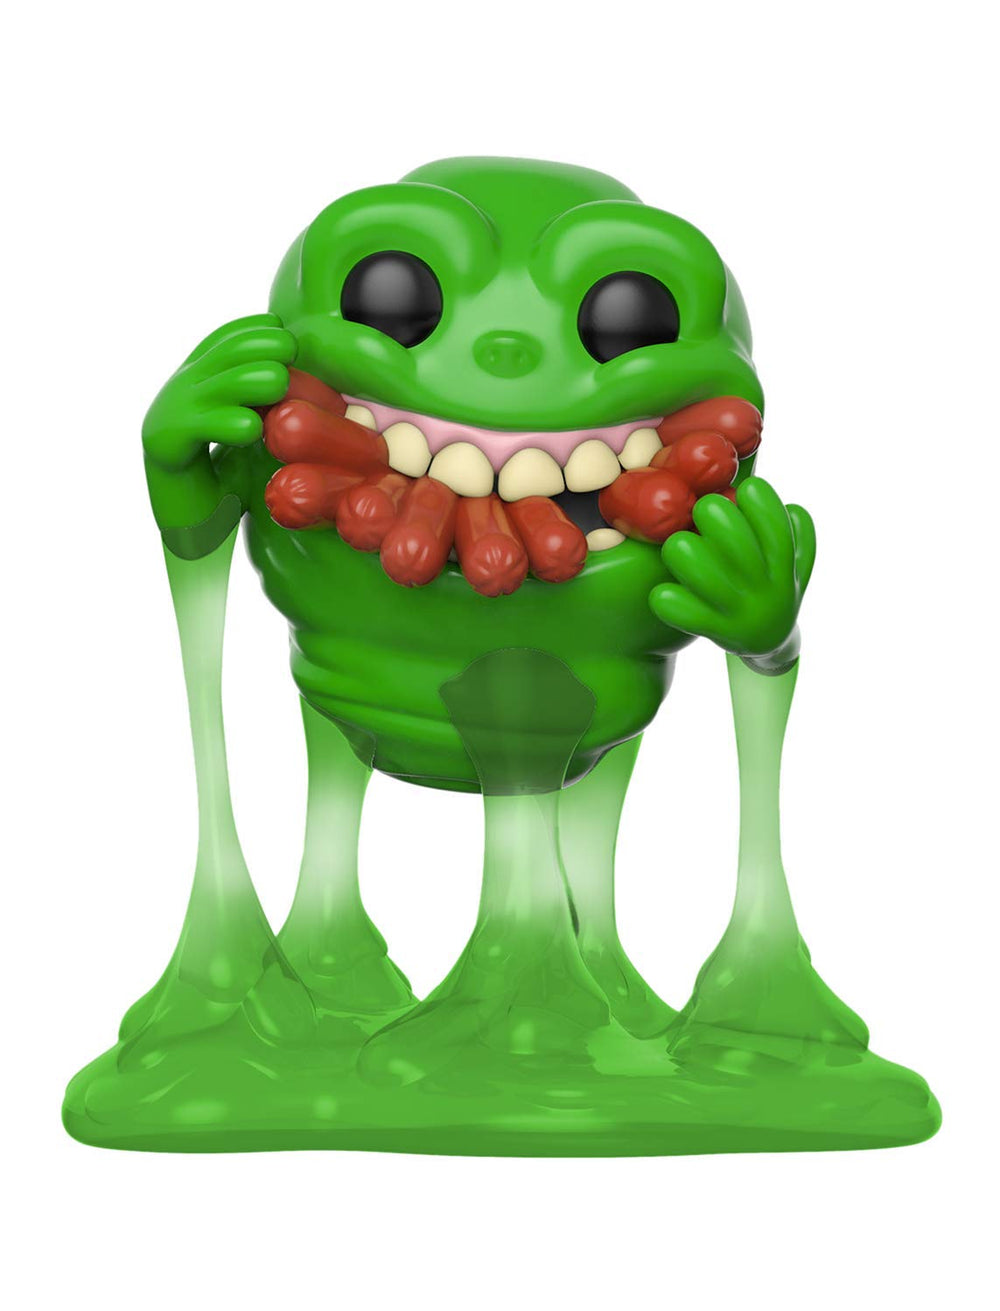 Funko Pop Movies: Ghostbusters - Slimer with Hot Dogs Vinyl Figure